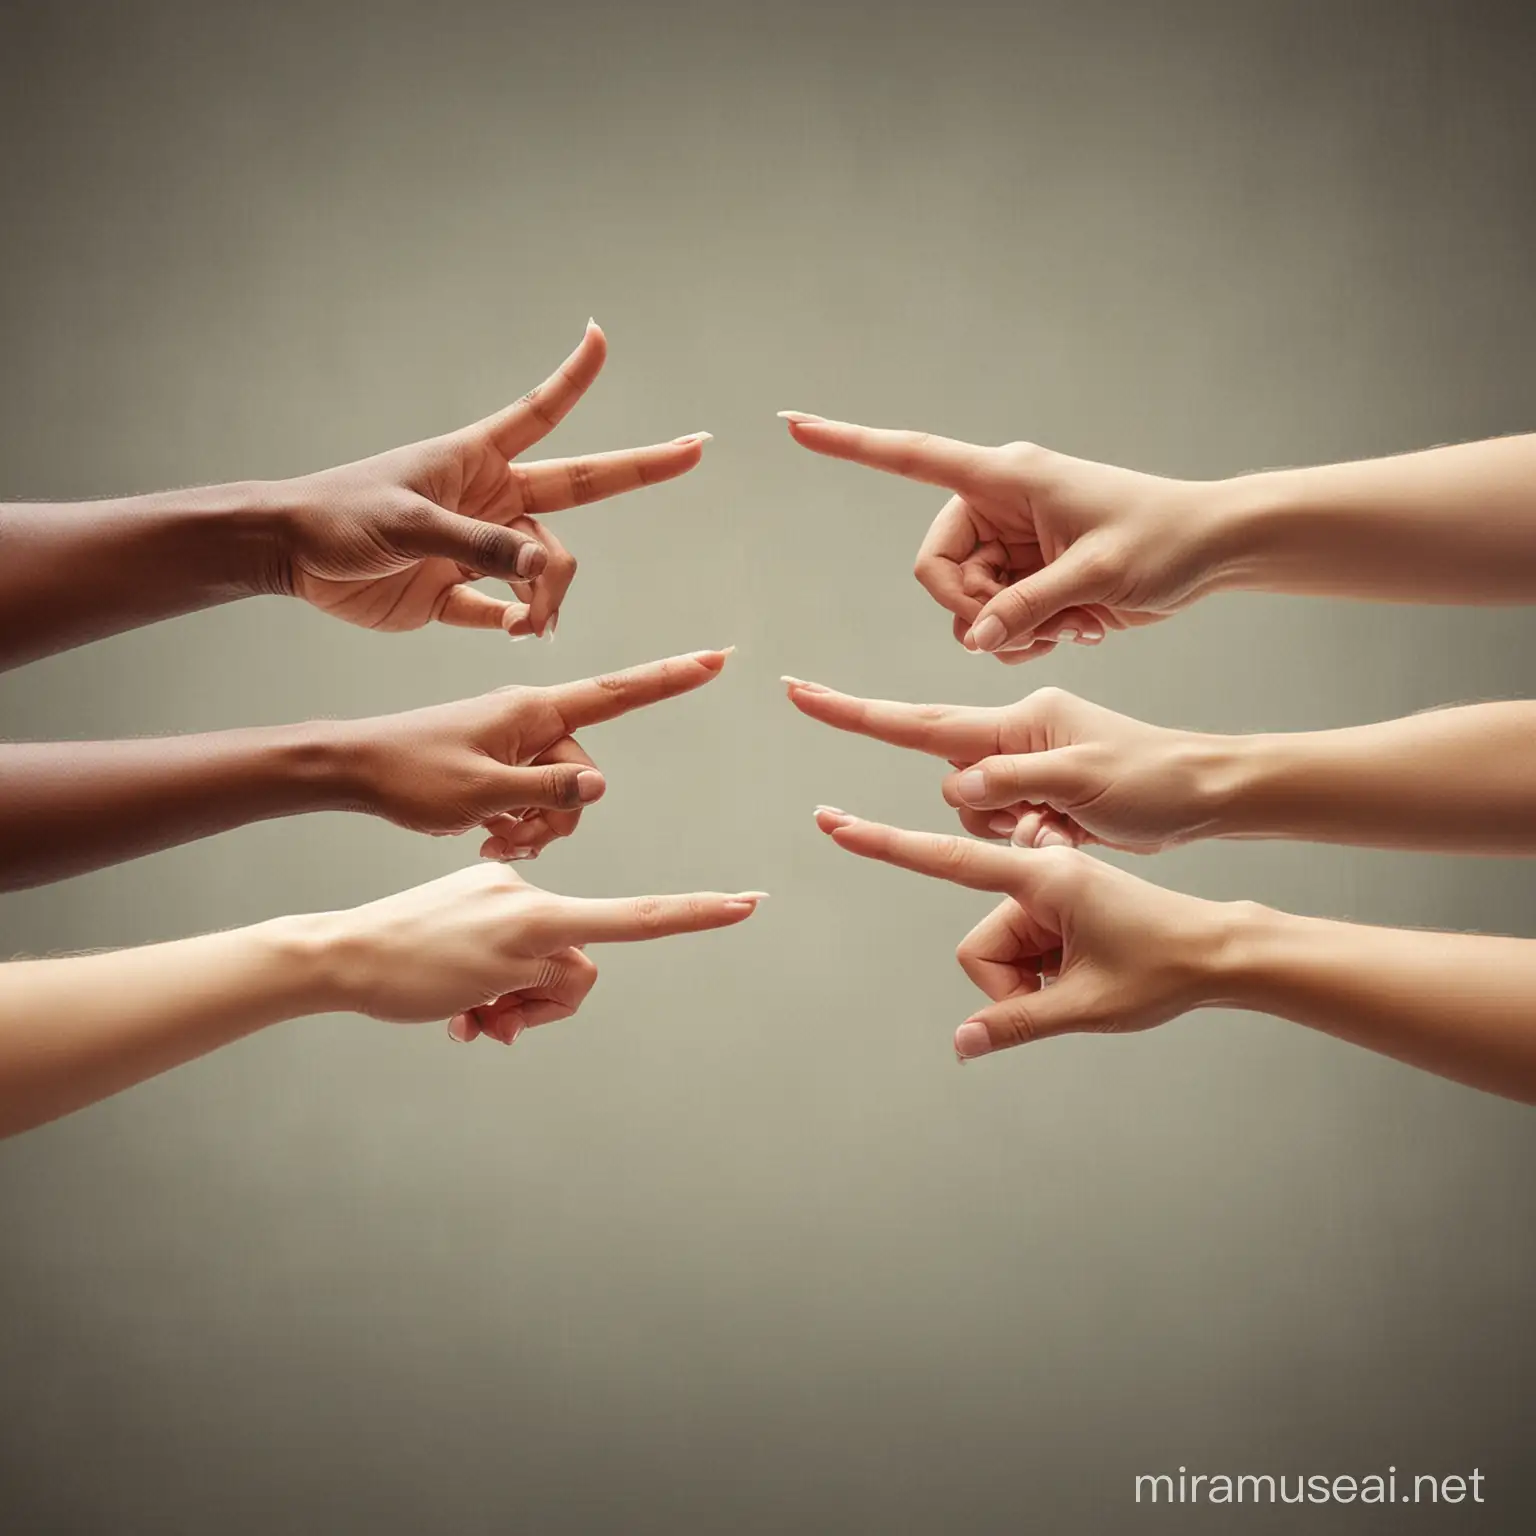 Diverse Hands Pointing Together in Unity